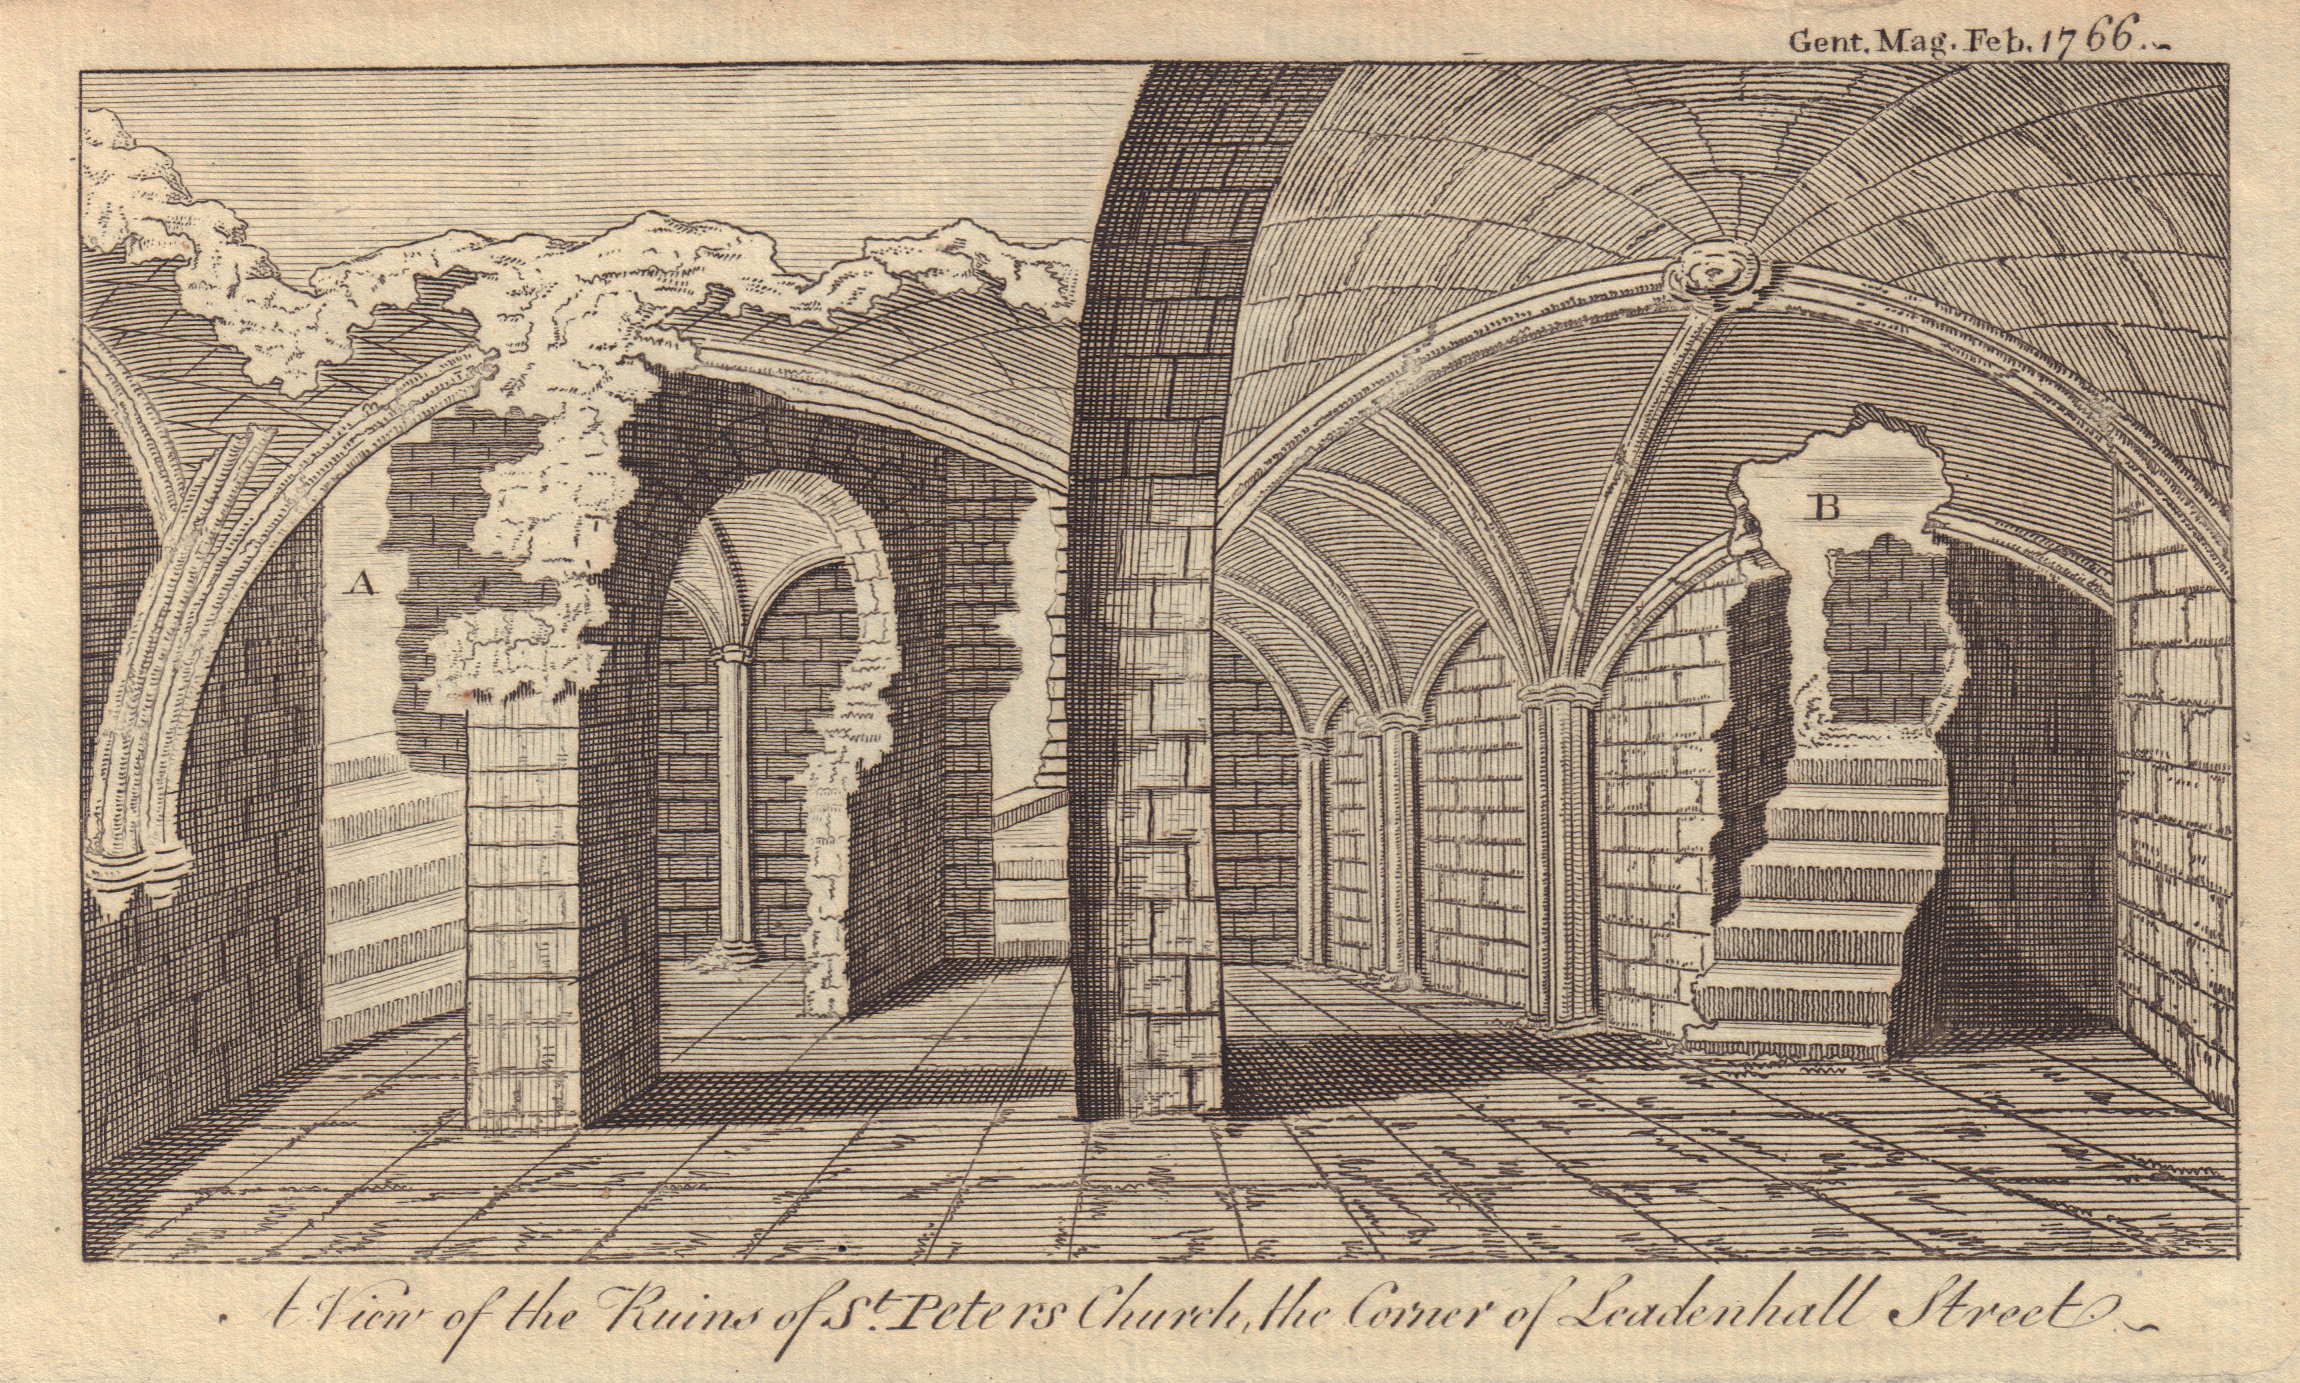 Associate Product The Ruins of St. Peter's Church, the Corner of Leadenhall Street, London 1766